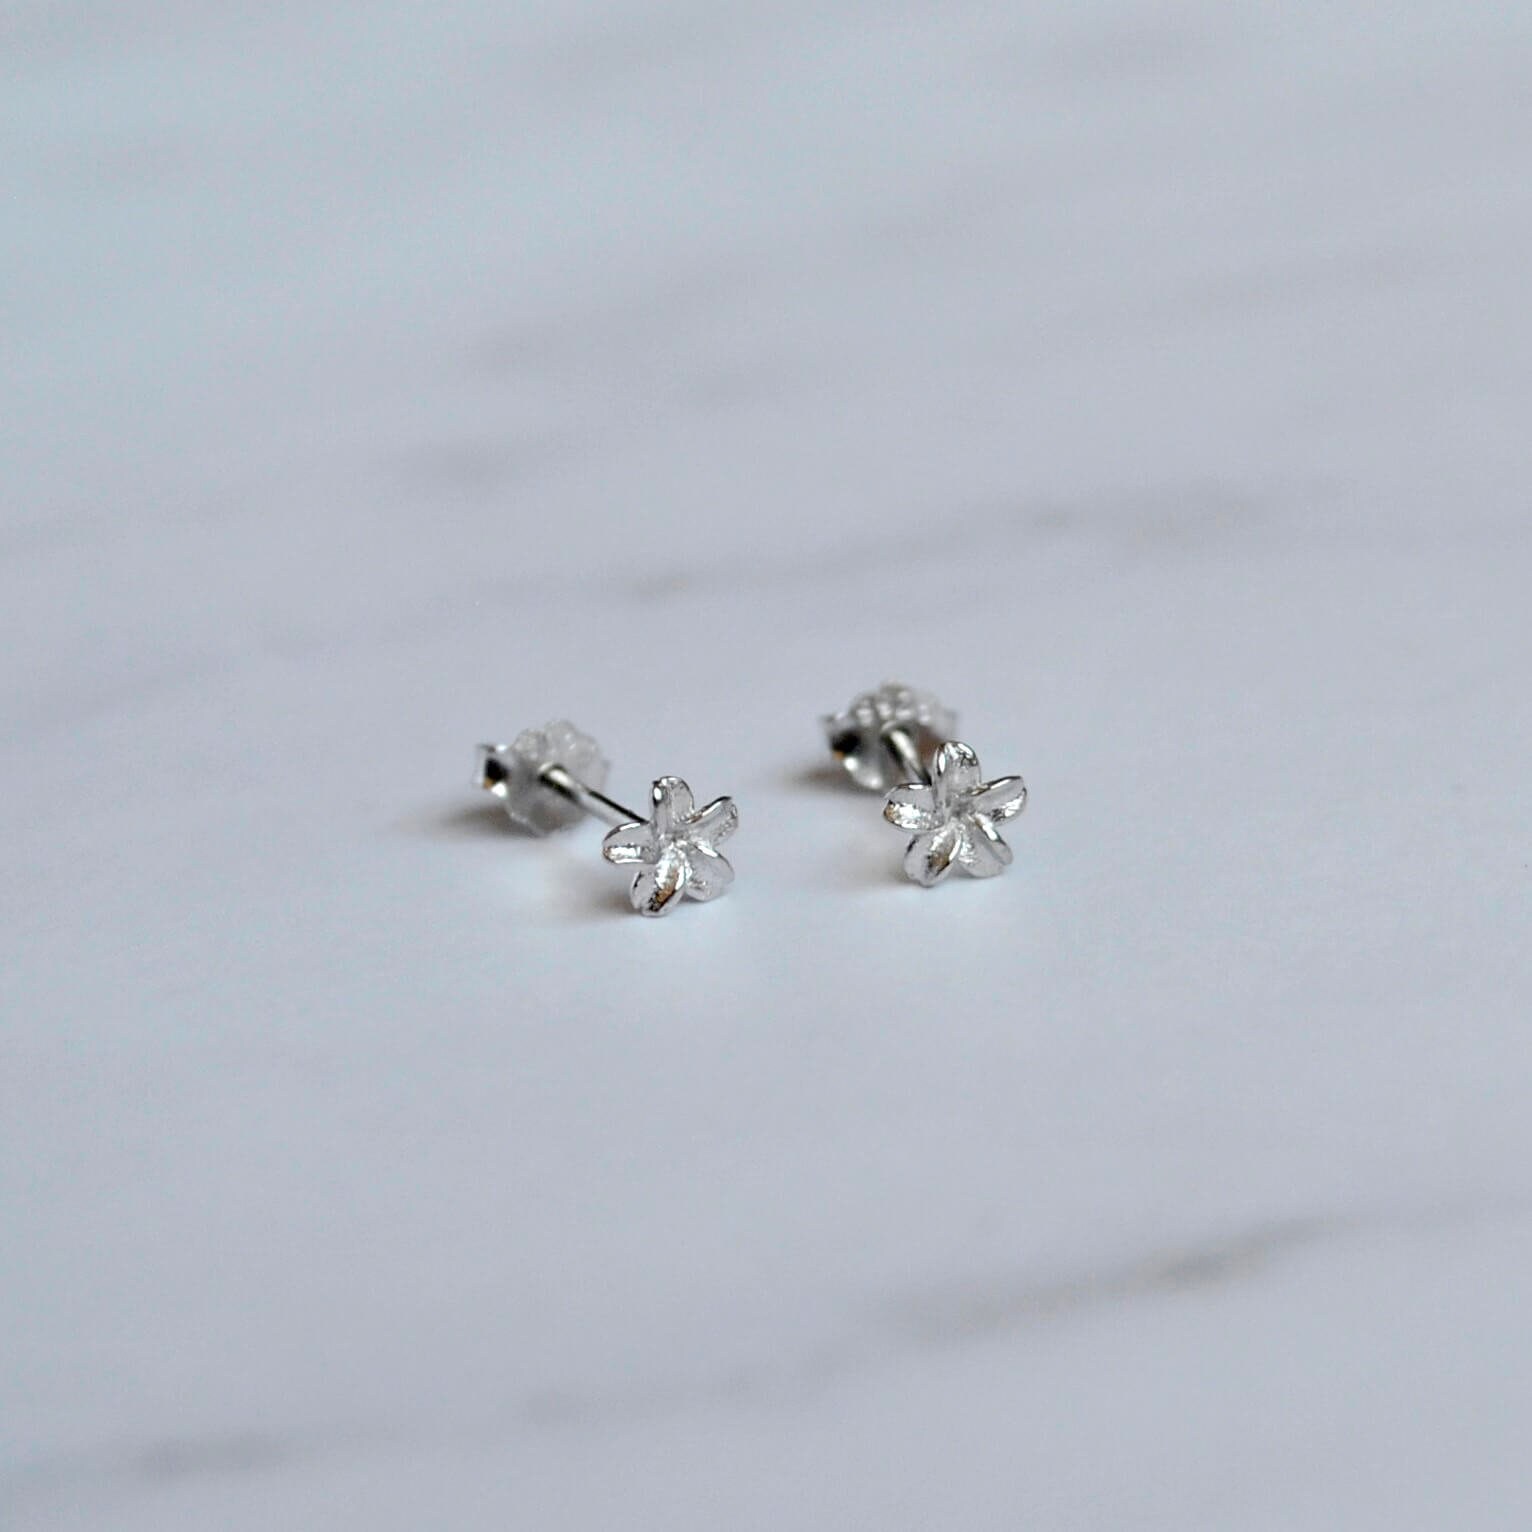 Tiny silver flower stud earrings. Small sterling silver | Etsy